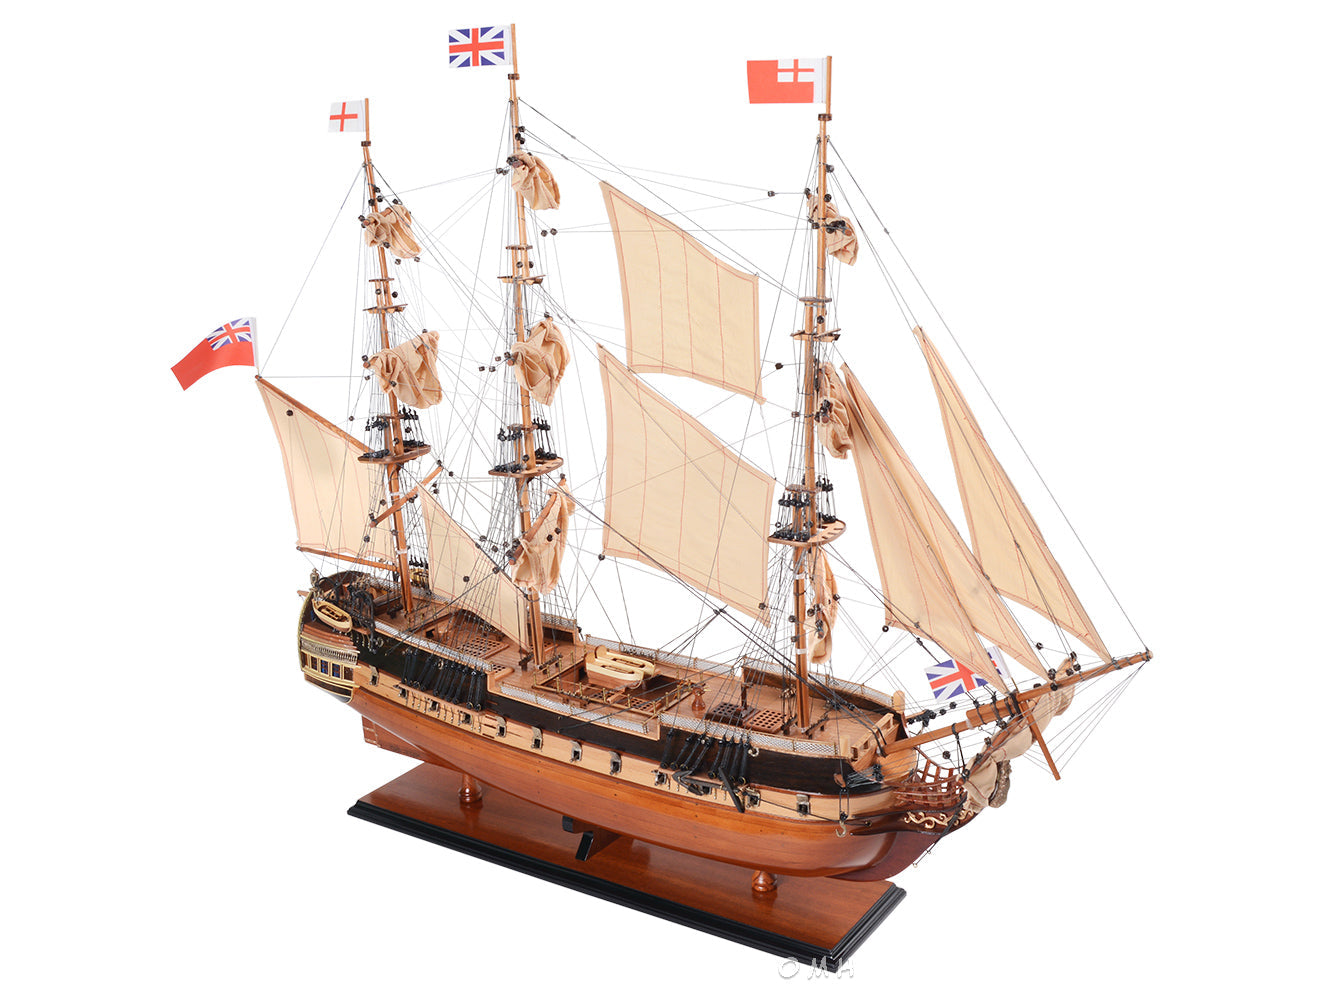 ALDO Hobbies & Creative Arts> Collectibles> Scale Model L: 37 W: 12 H: 31 Inches / new / wood HMS Surprise British Royal Navy Frigate Tall Ship  Portrayed in the Movie Master and Commander Wood Model Sailboat Assembled